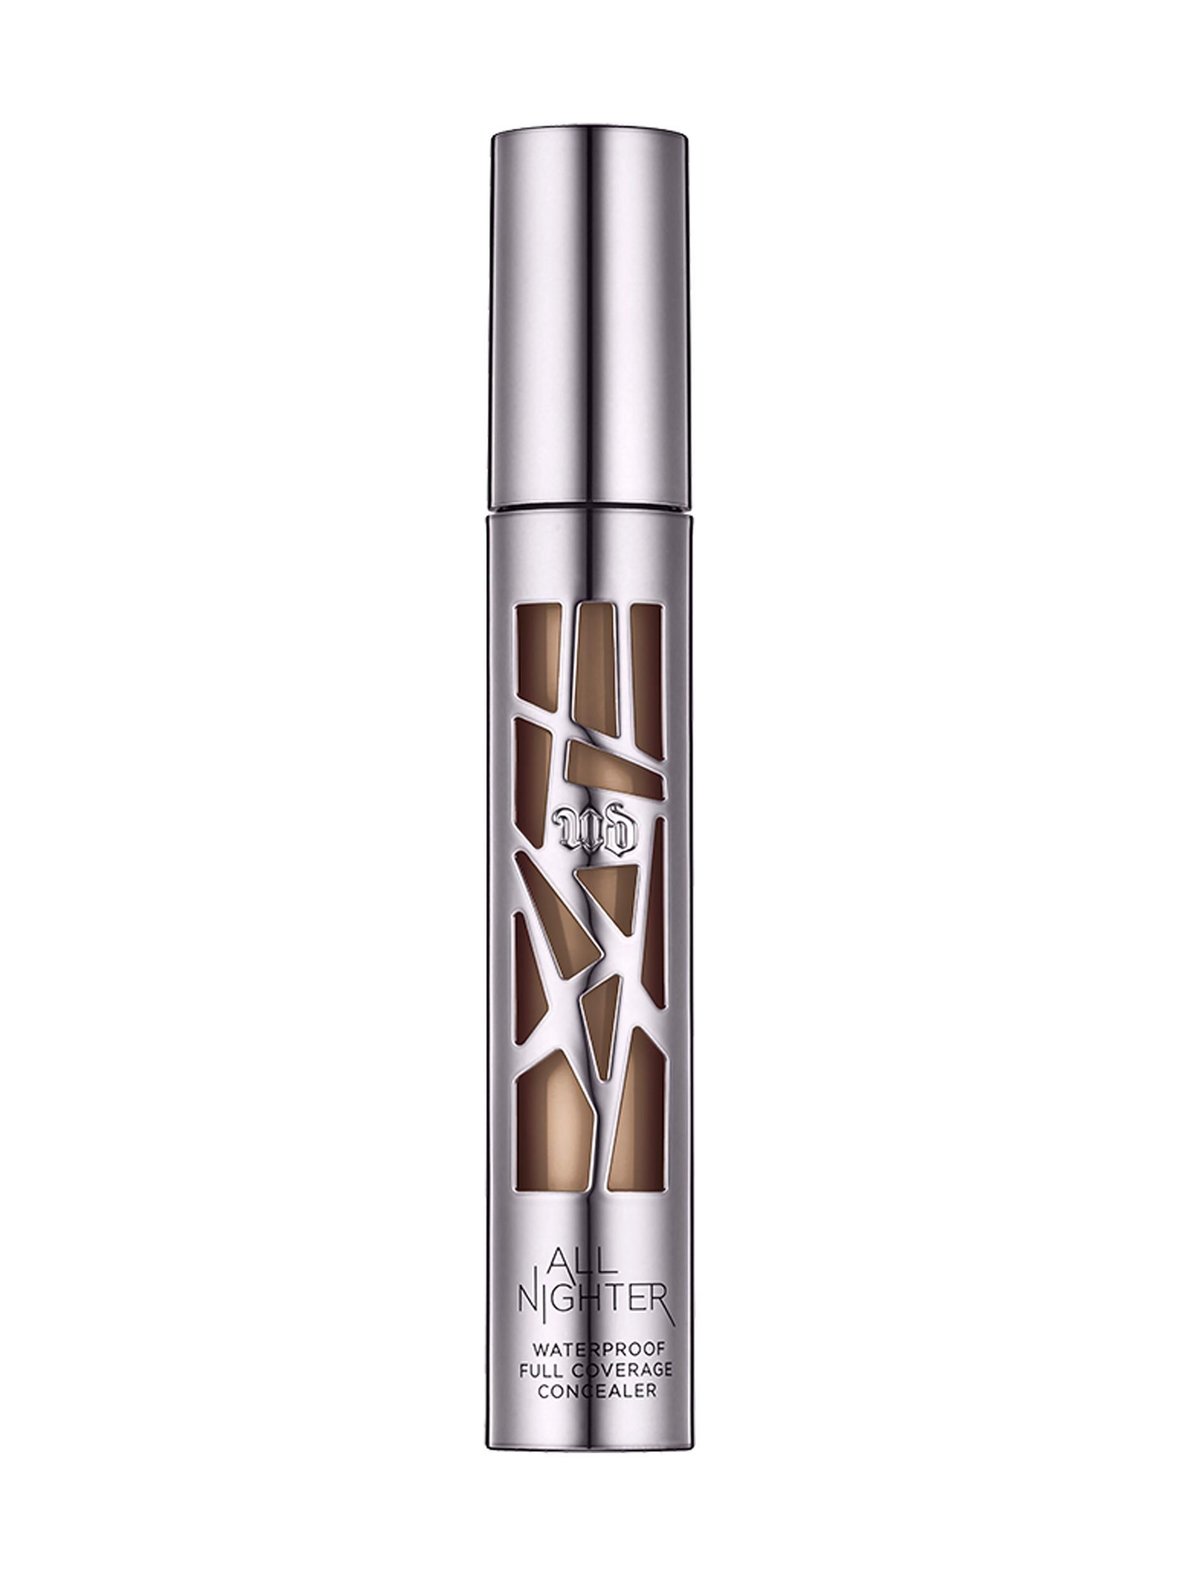 All Nighter Waterproof Full-Coverage -peitevoide, Urban Decay